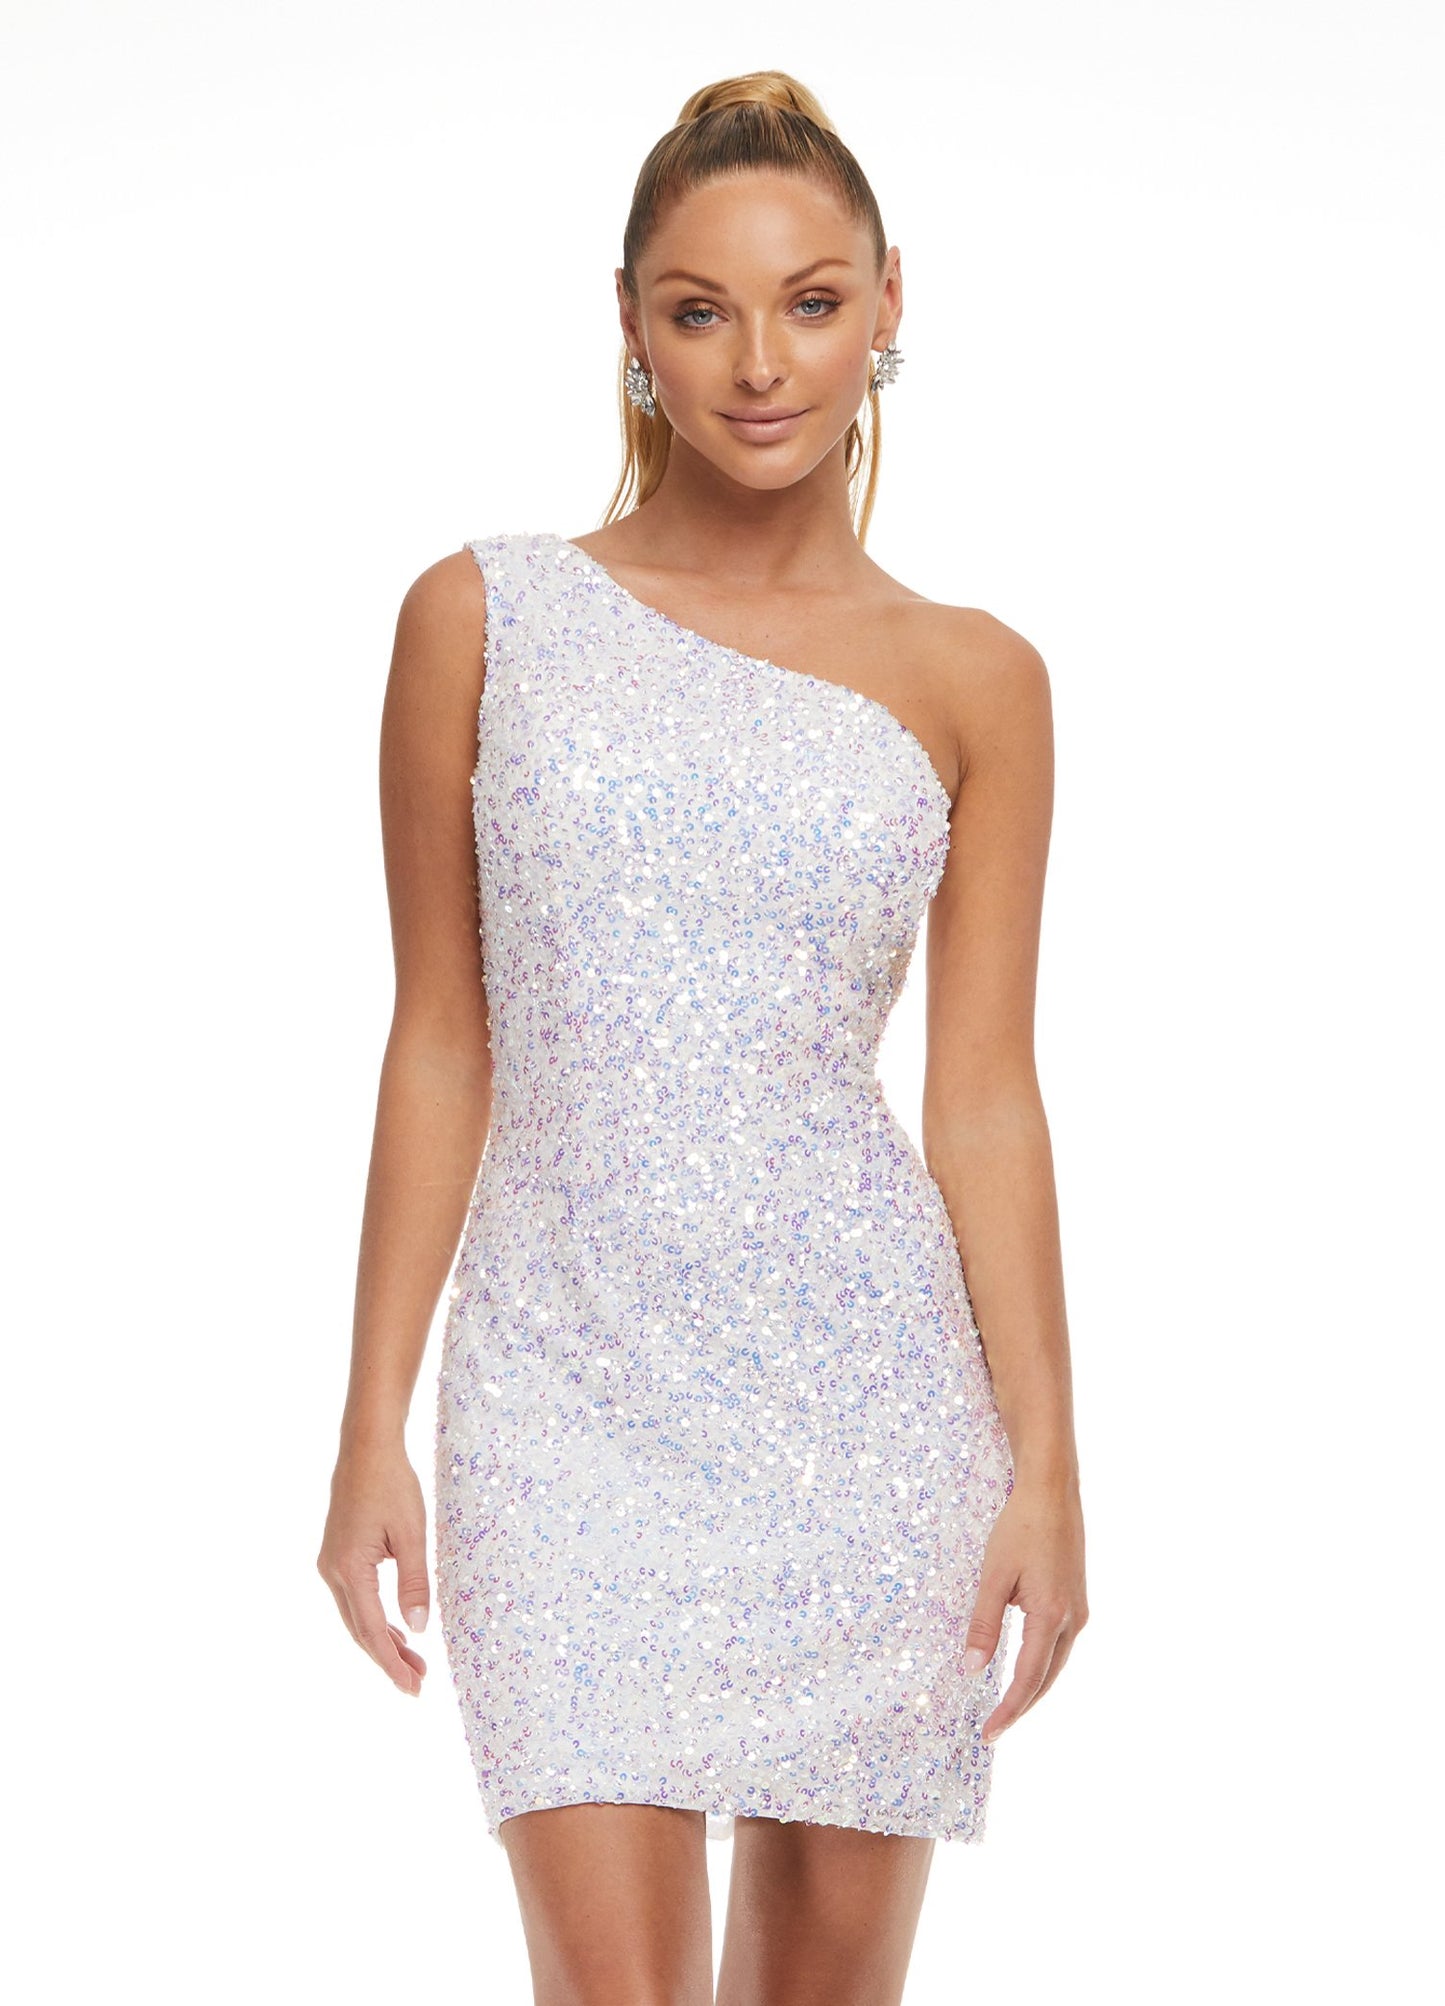 Ashley-Lauren-4469-white-cocktail-dress-front-sequin-one-shoulder-strap-asymmetrical-lace-up-back-cutout-fitted